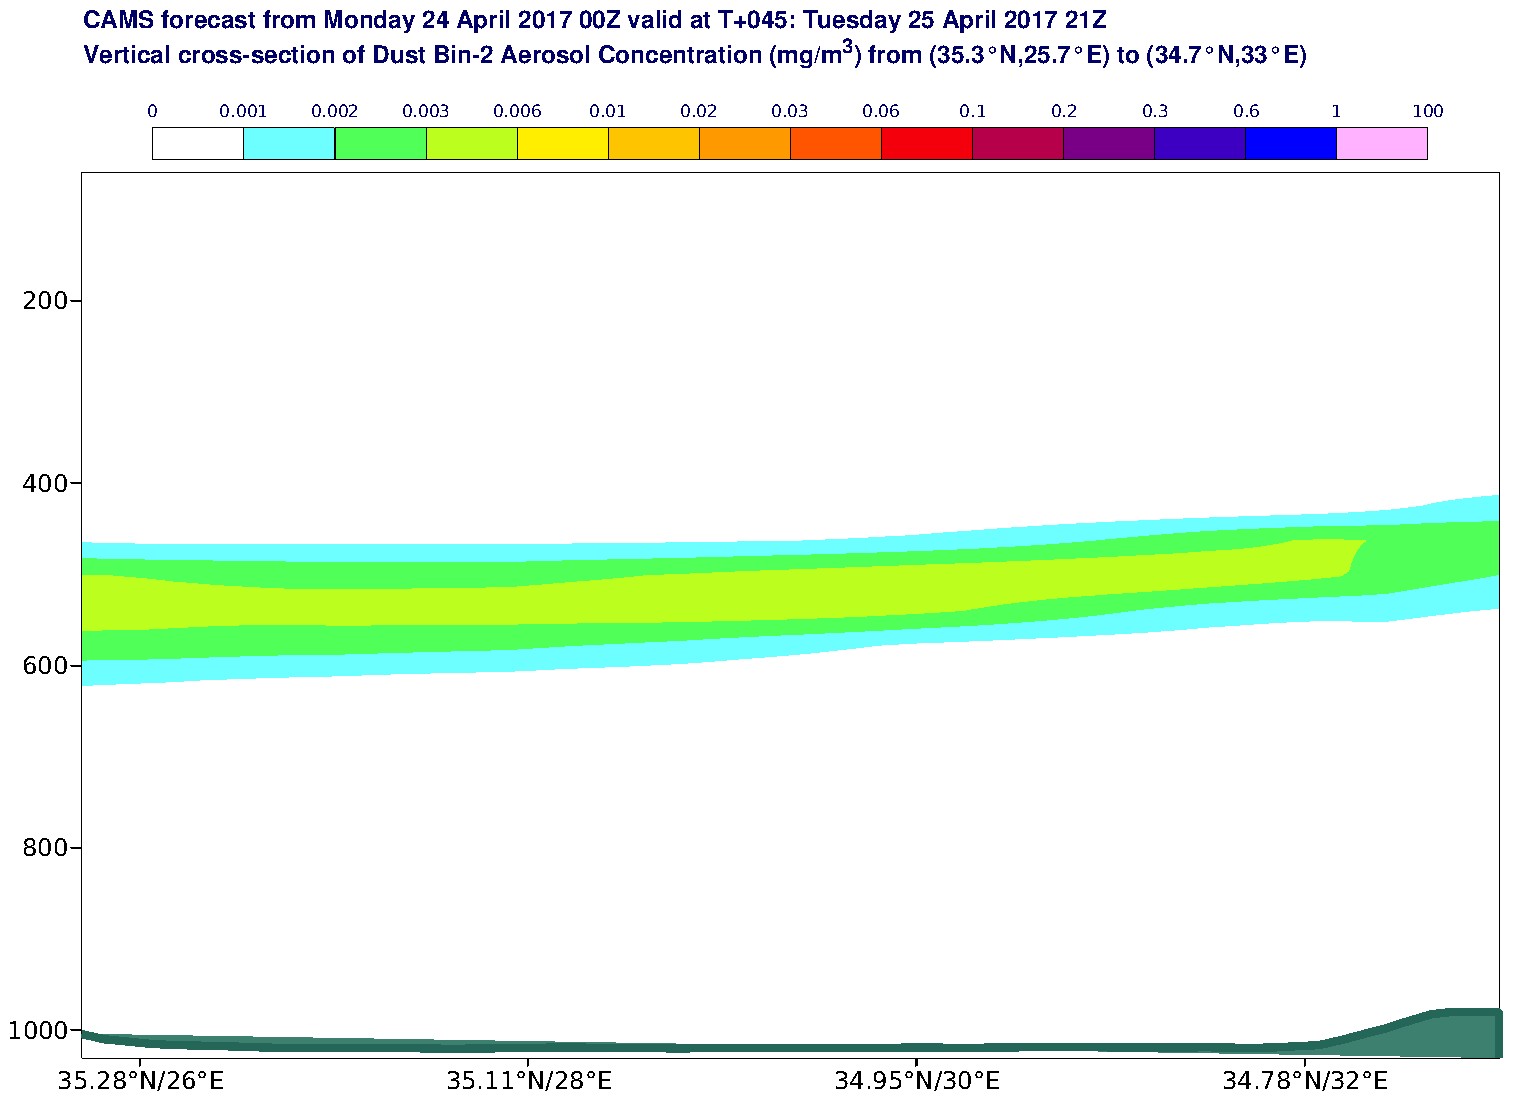 Vertical cross-section of Dust Bin-2 Aerosol Concentration (mg/m3) valid at T45 - 2017-04-25 21:00